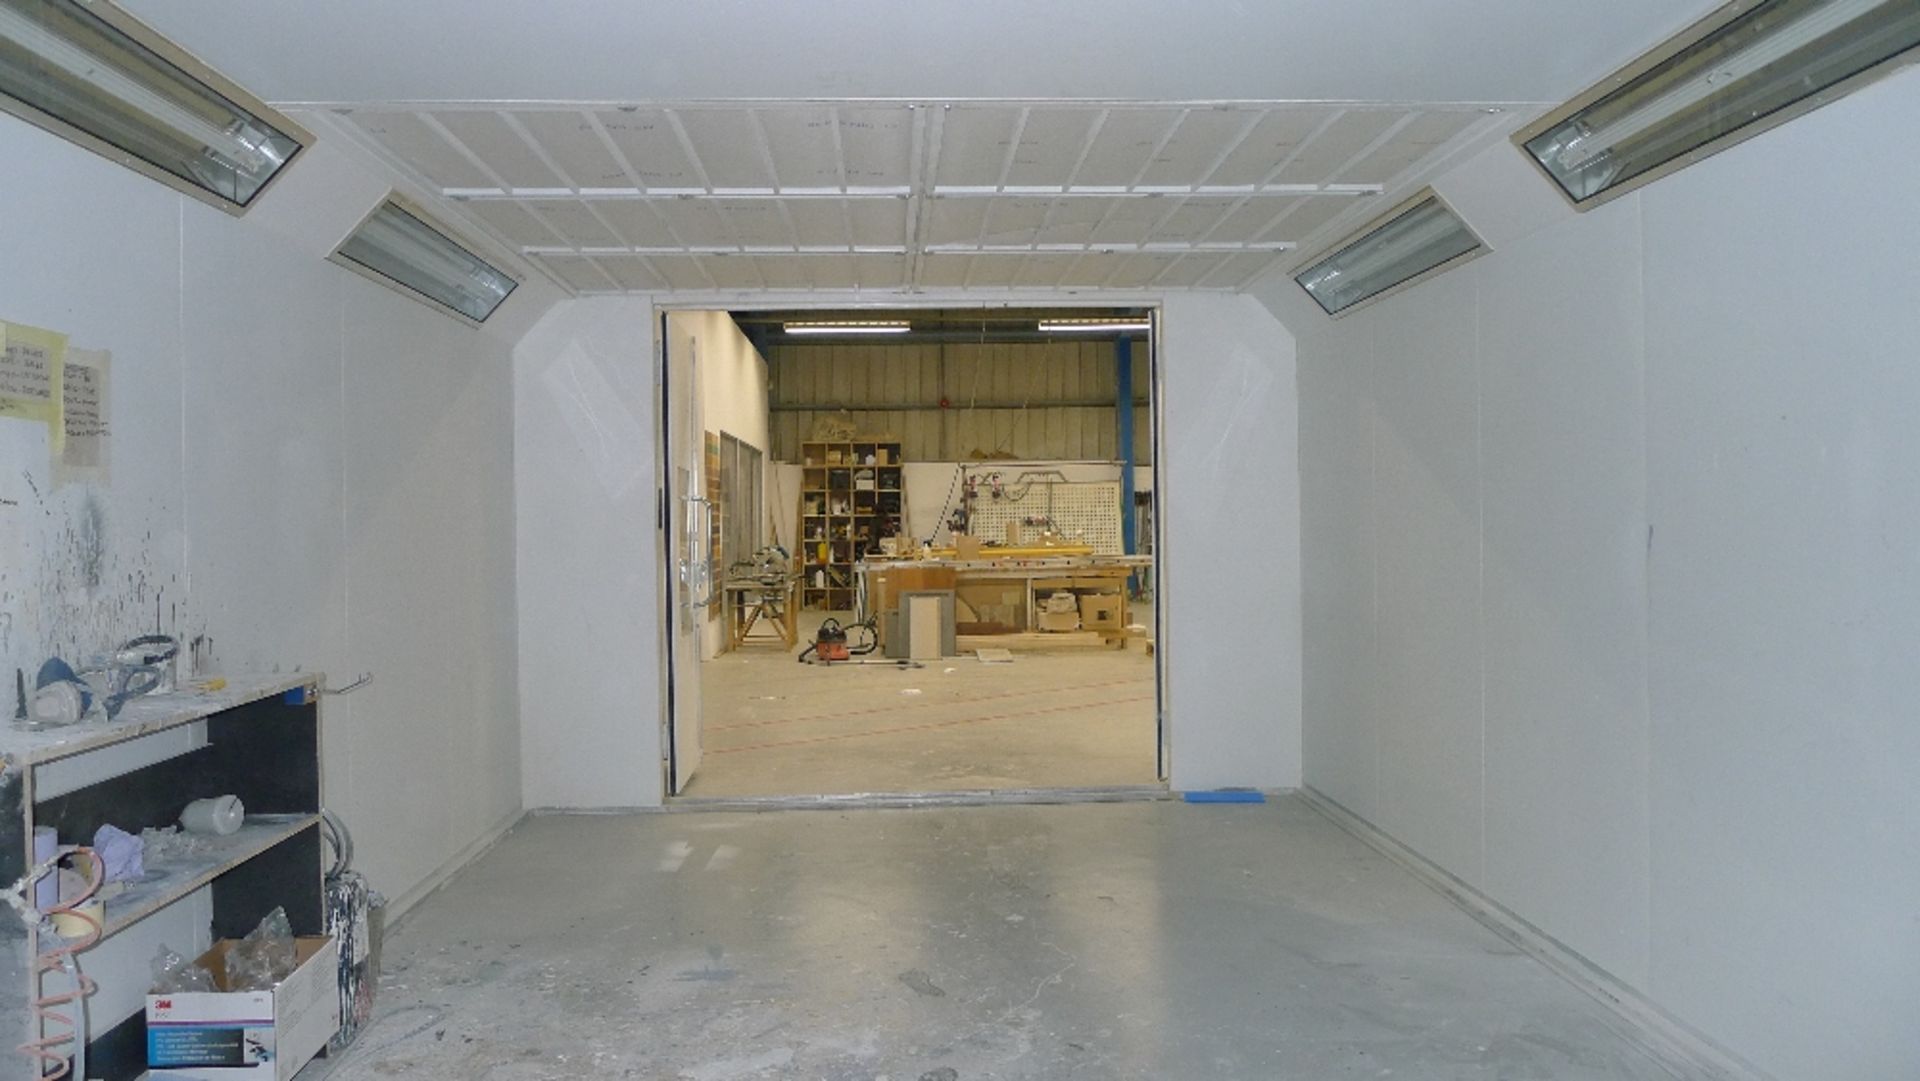 1 heated spray booth by Todd Engineering type Olympian 1000 series, approx 24 ft x 12 ft with tri- - Image 8 of 11